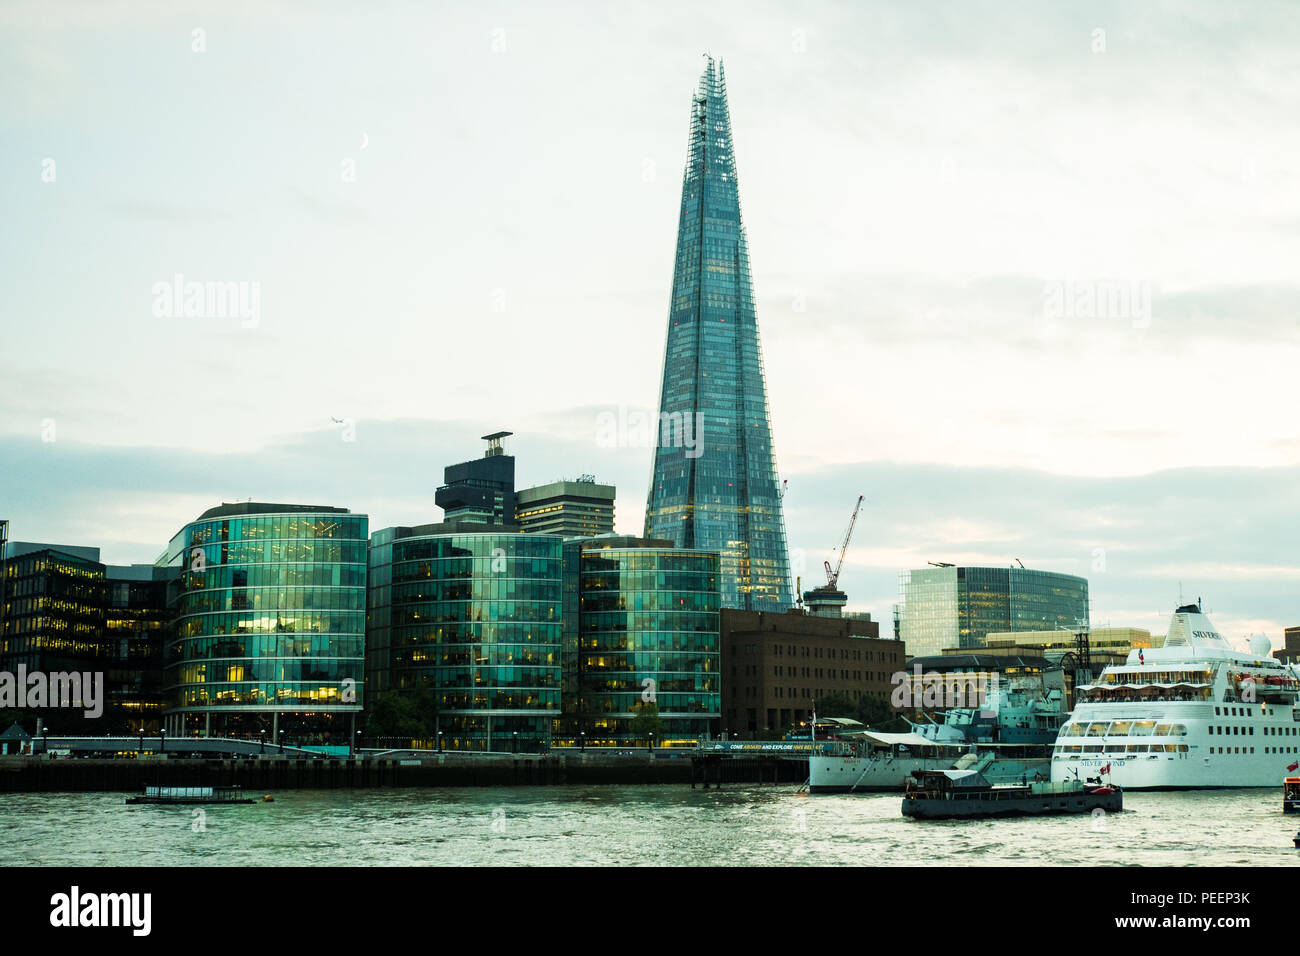 Cruise Ship on the River Thames with The Shard (of Glass) skyscraper & HMS Belfast museum ship, London. Stock Photo